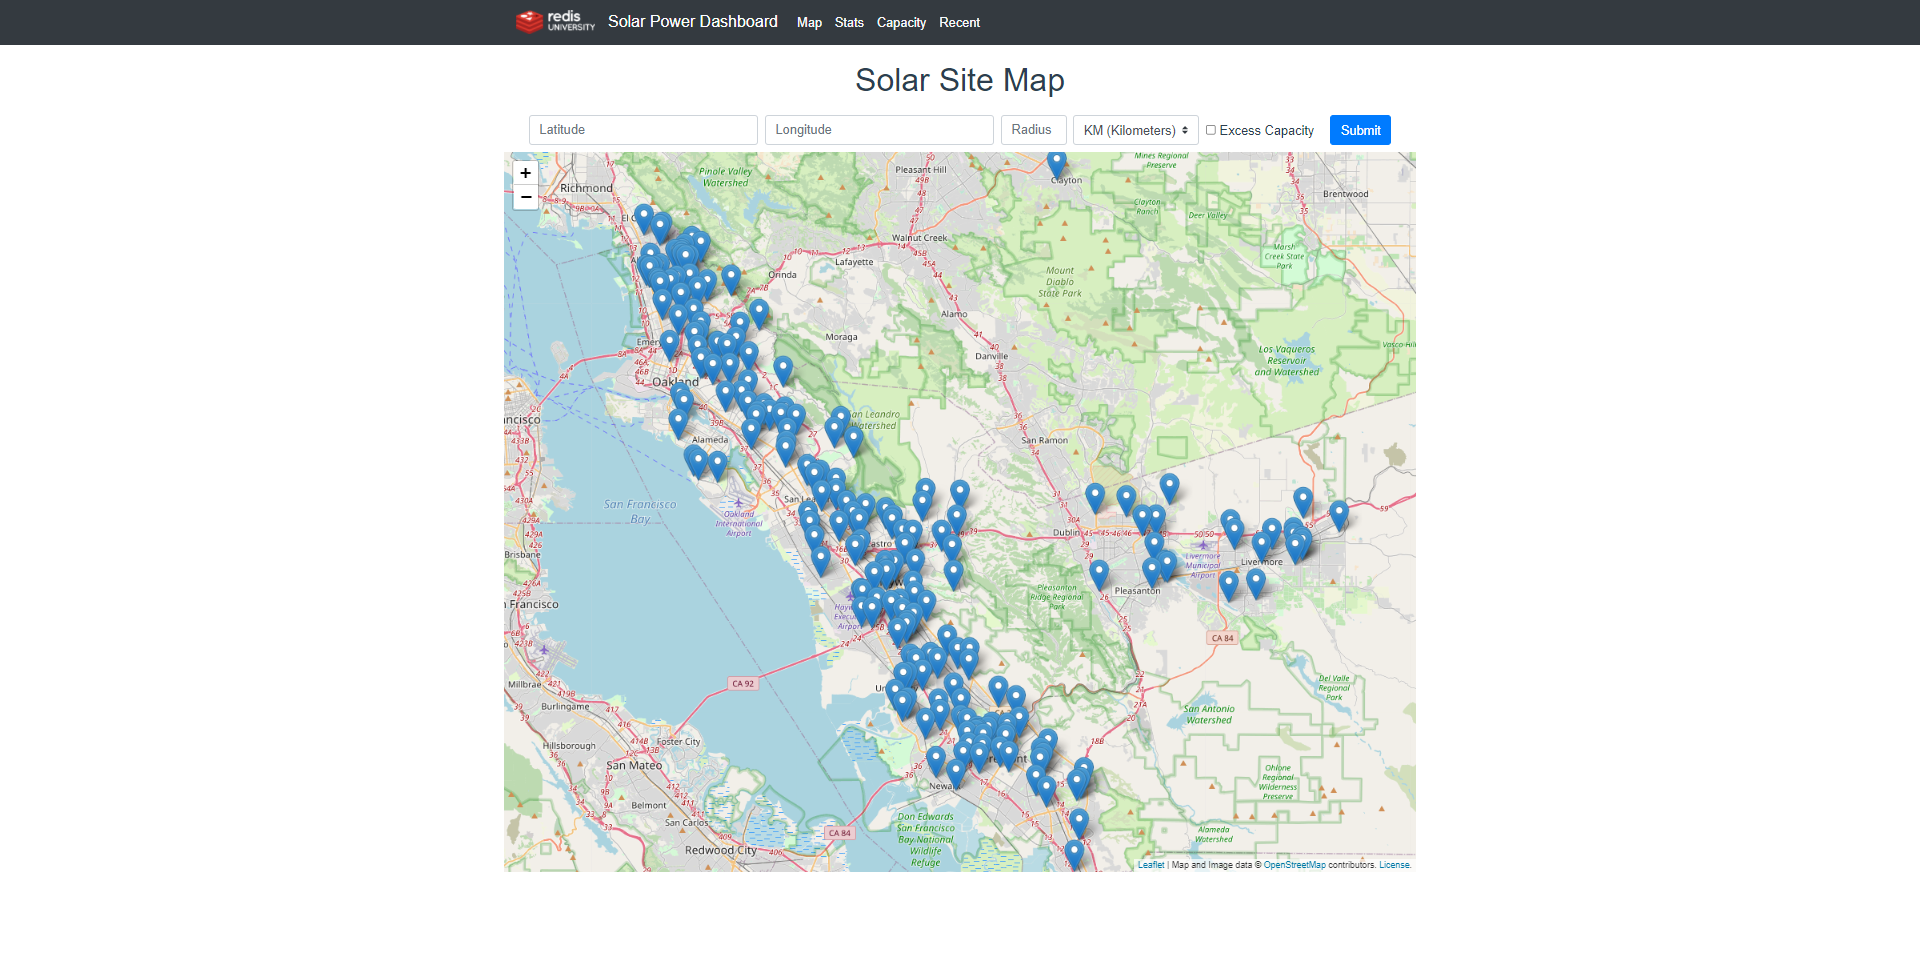 Preview of running application - Solar Site Map with markers